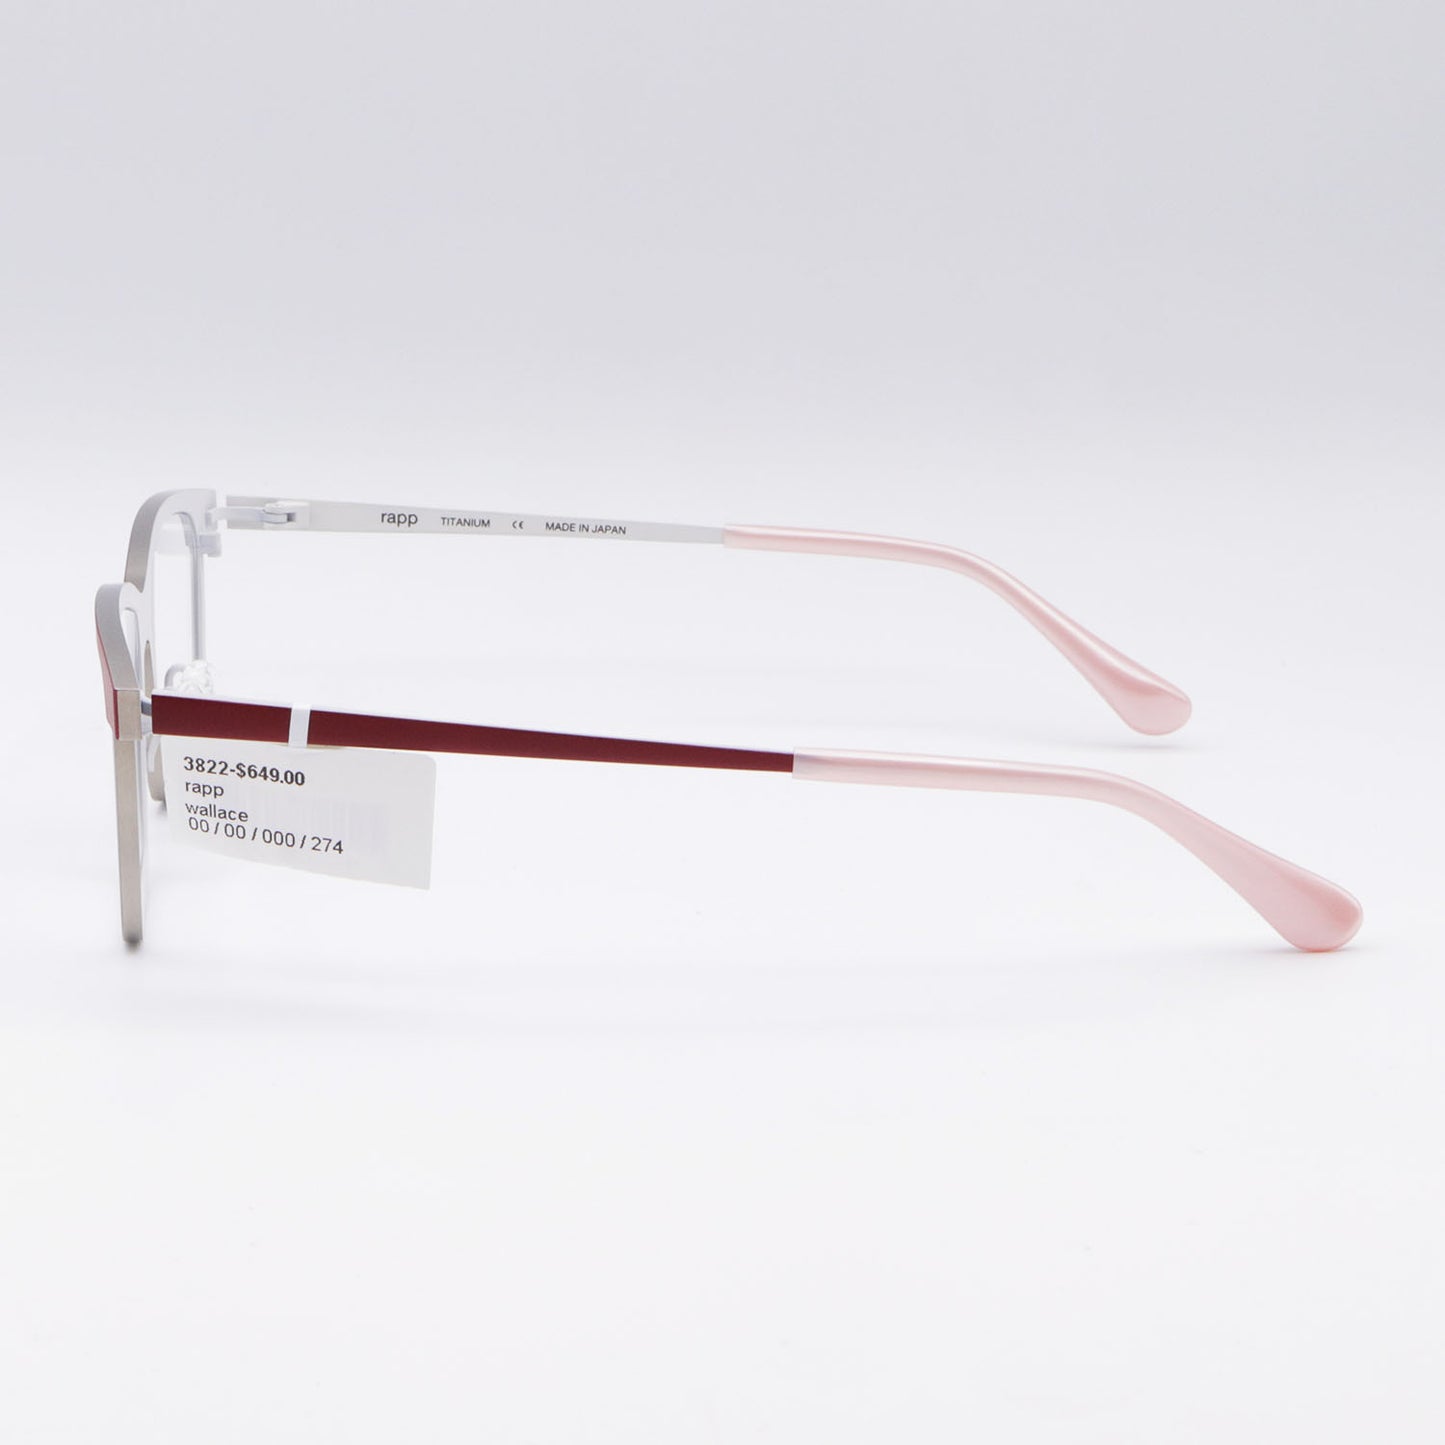 Wallace Rapp Frames Glasses Red and White